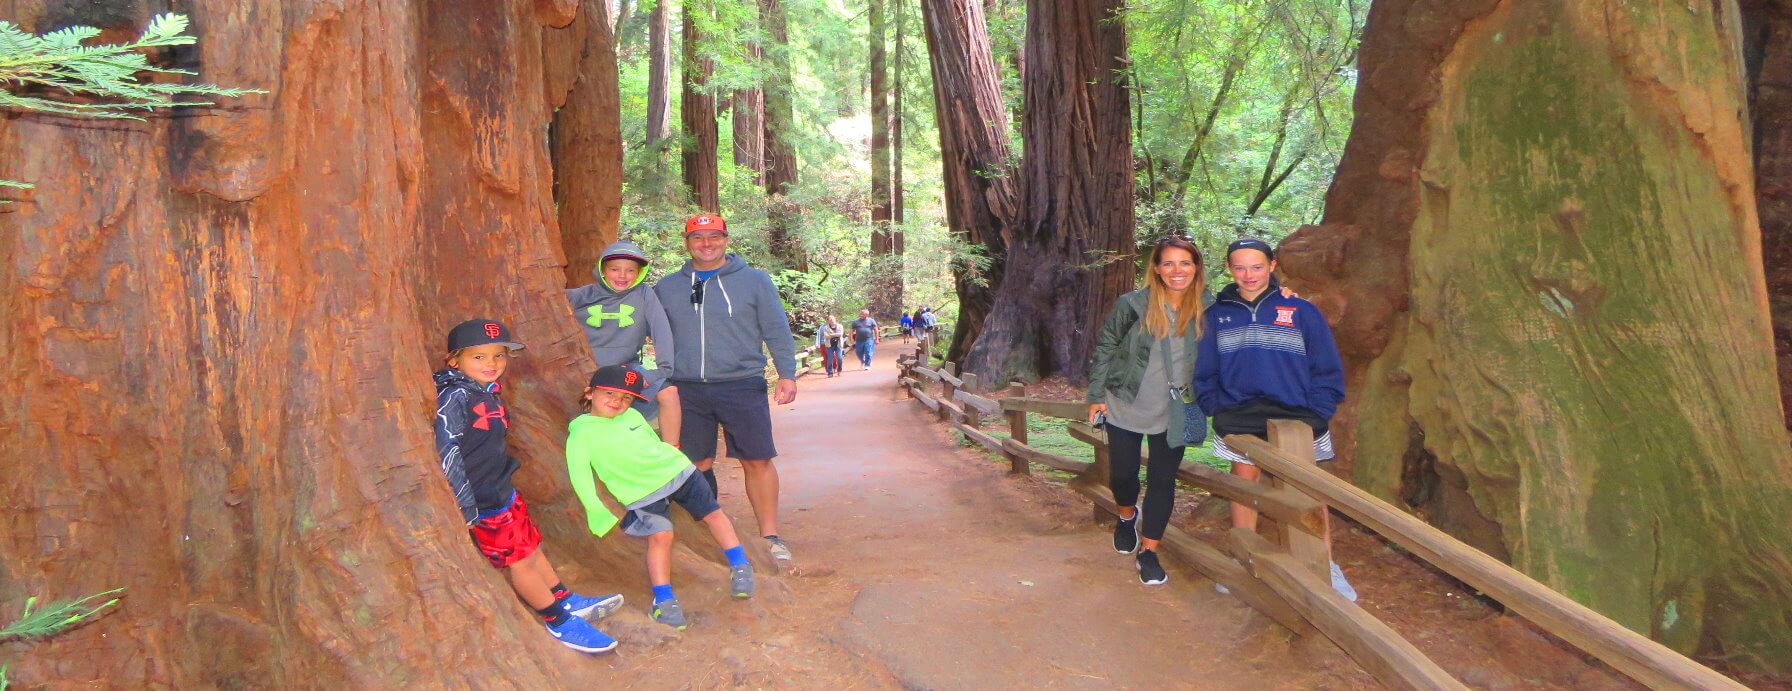 tips_for_taking_a_muir_woods_redwoods_tour_with_kids_from_san_francisco